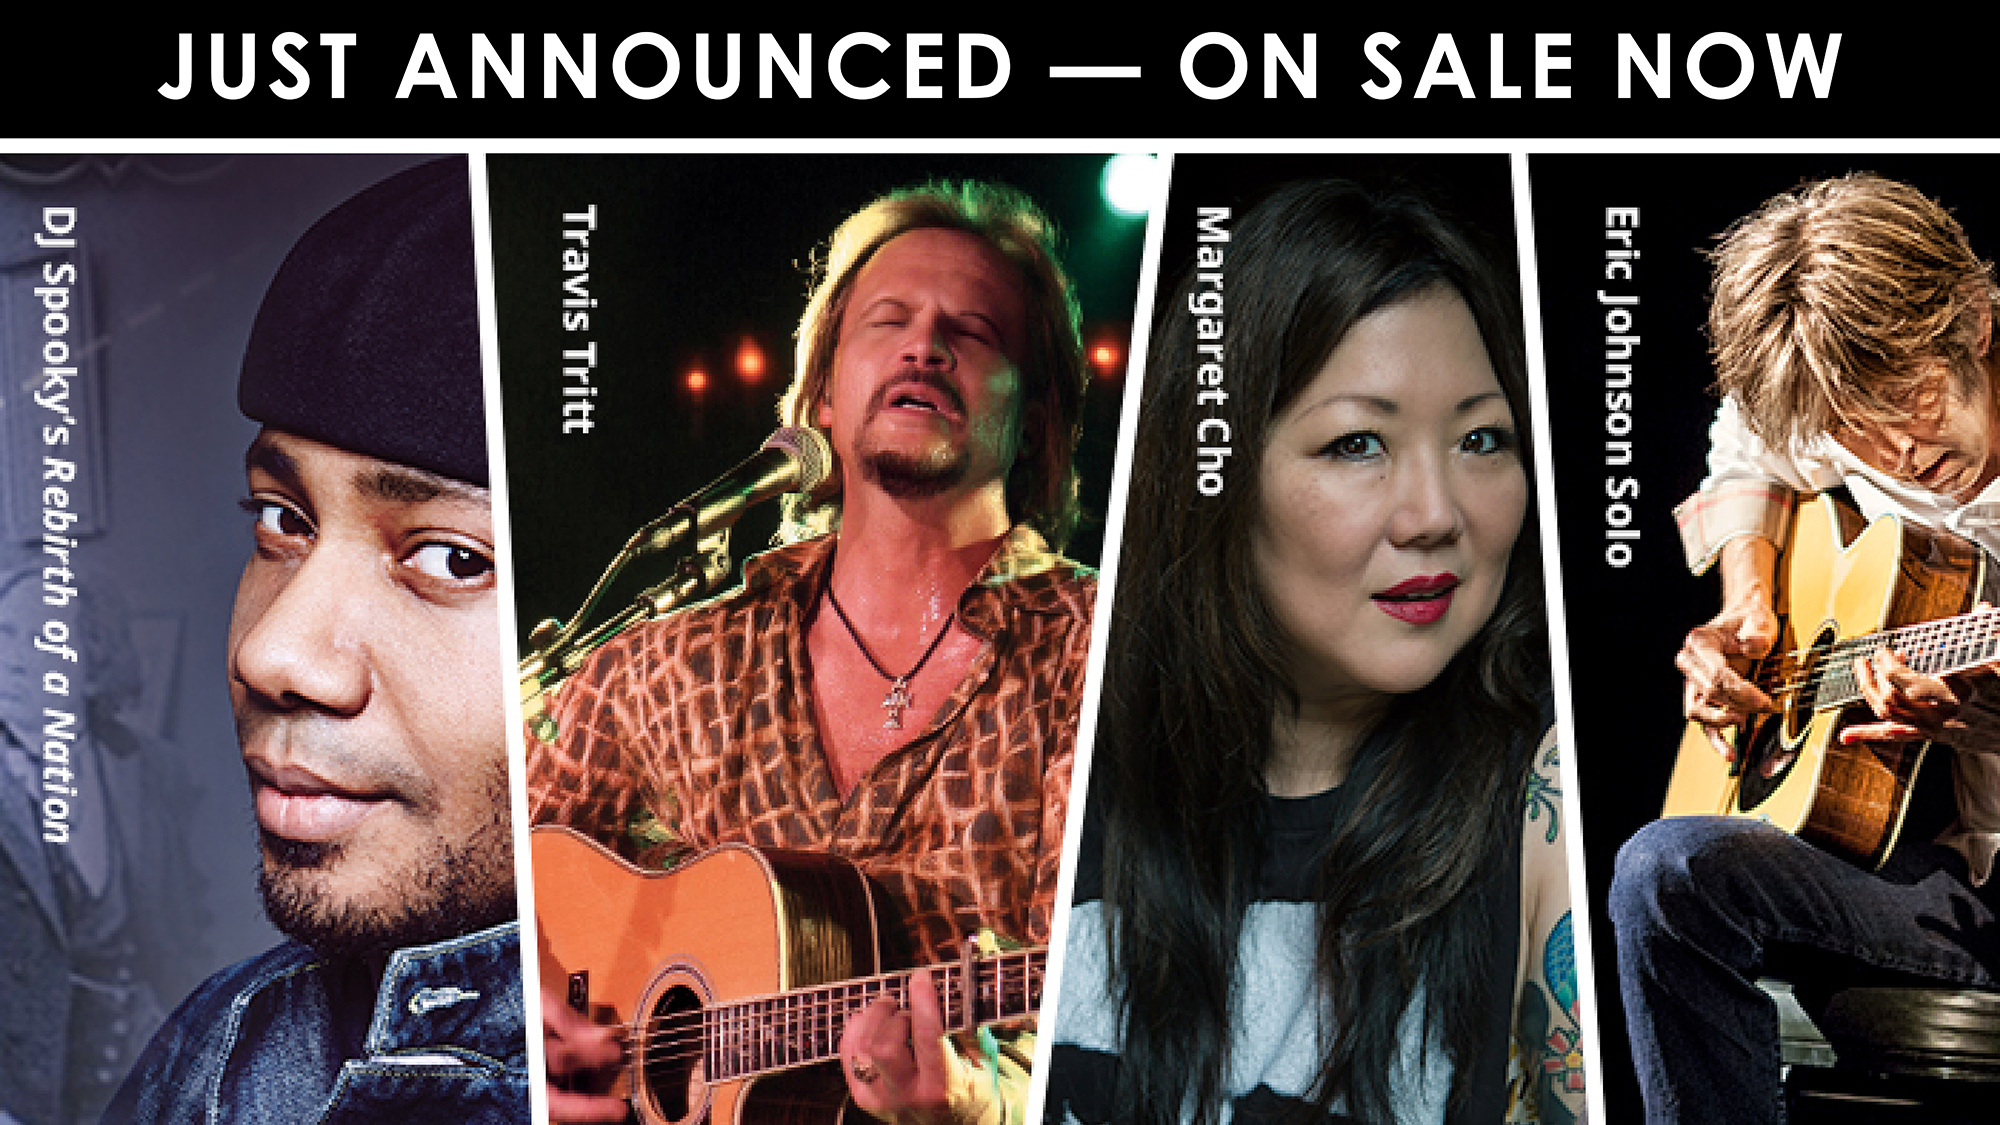 Photo collage of DJ Spooky, Travis Tritt, Margaret Chos and Eric Johnson. Graphic reads "Just Announced - On Sale Now"